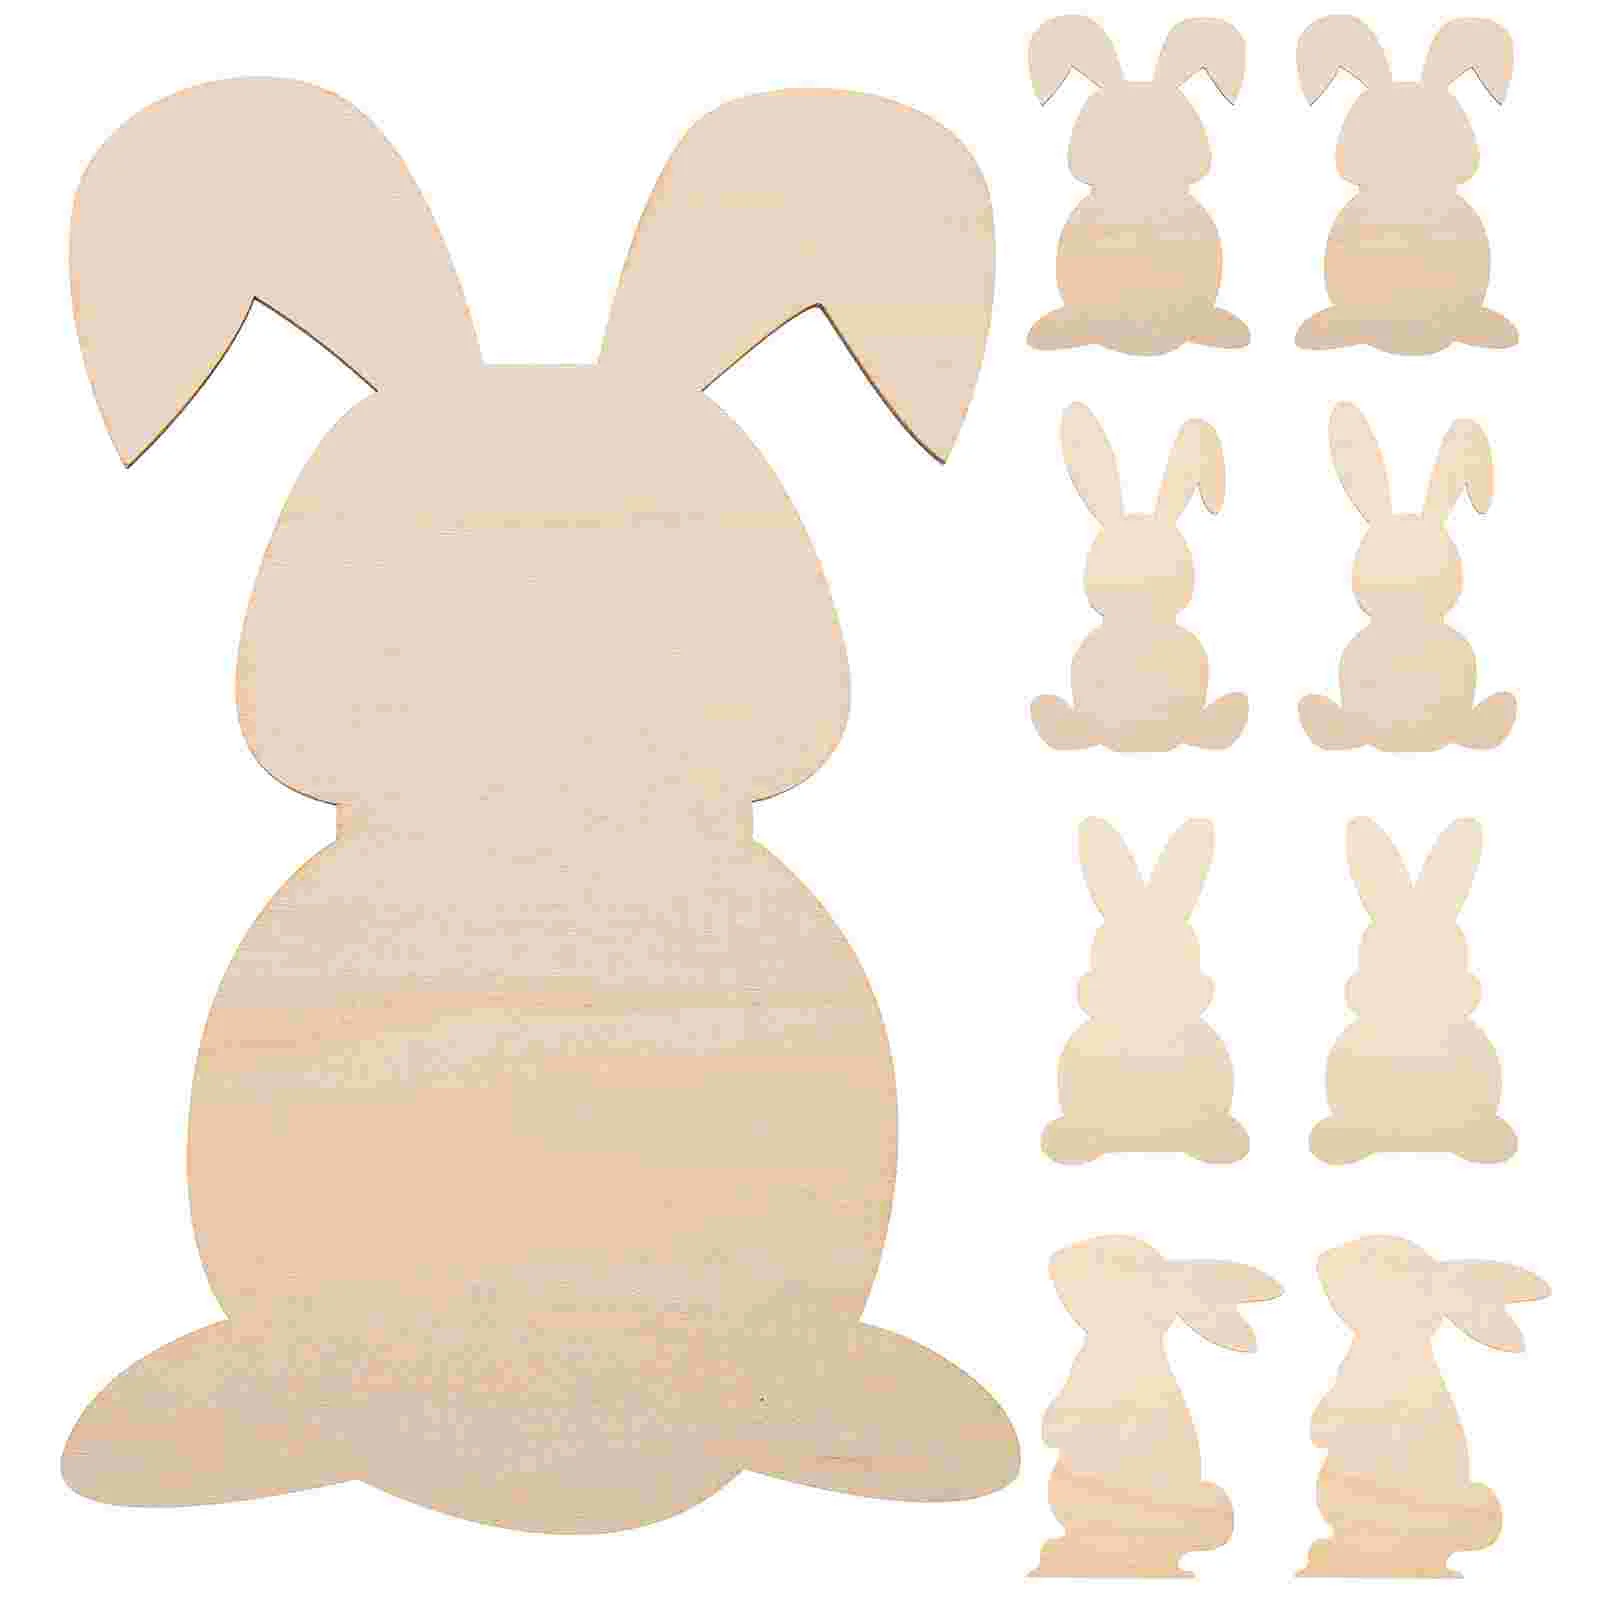 

Easter Bunny Wood Wooden Cutouts Crafts Unfinished Slices Cutout Rabbit Decorations Ornaments Blank Ornament Hanging Decor Diy